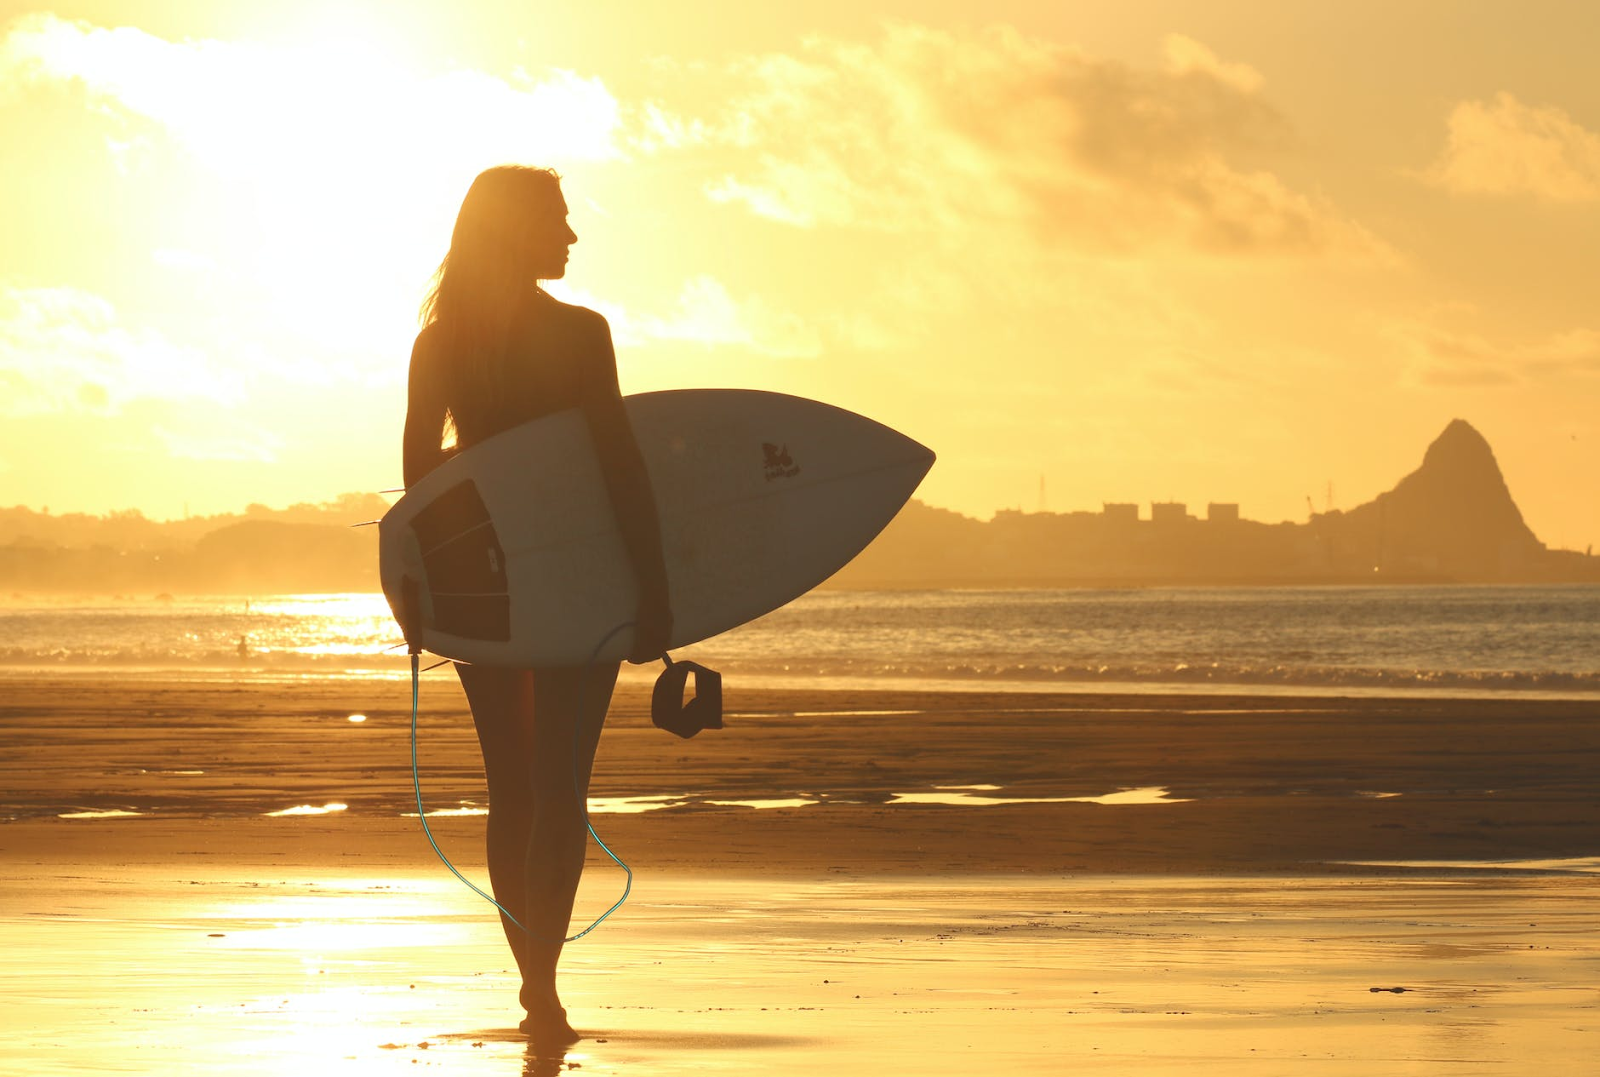 How ‘Outer Bar Babes’ are Transforming Big-Wave Surfing